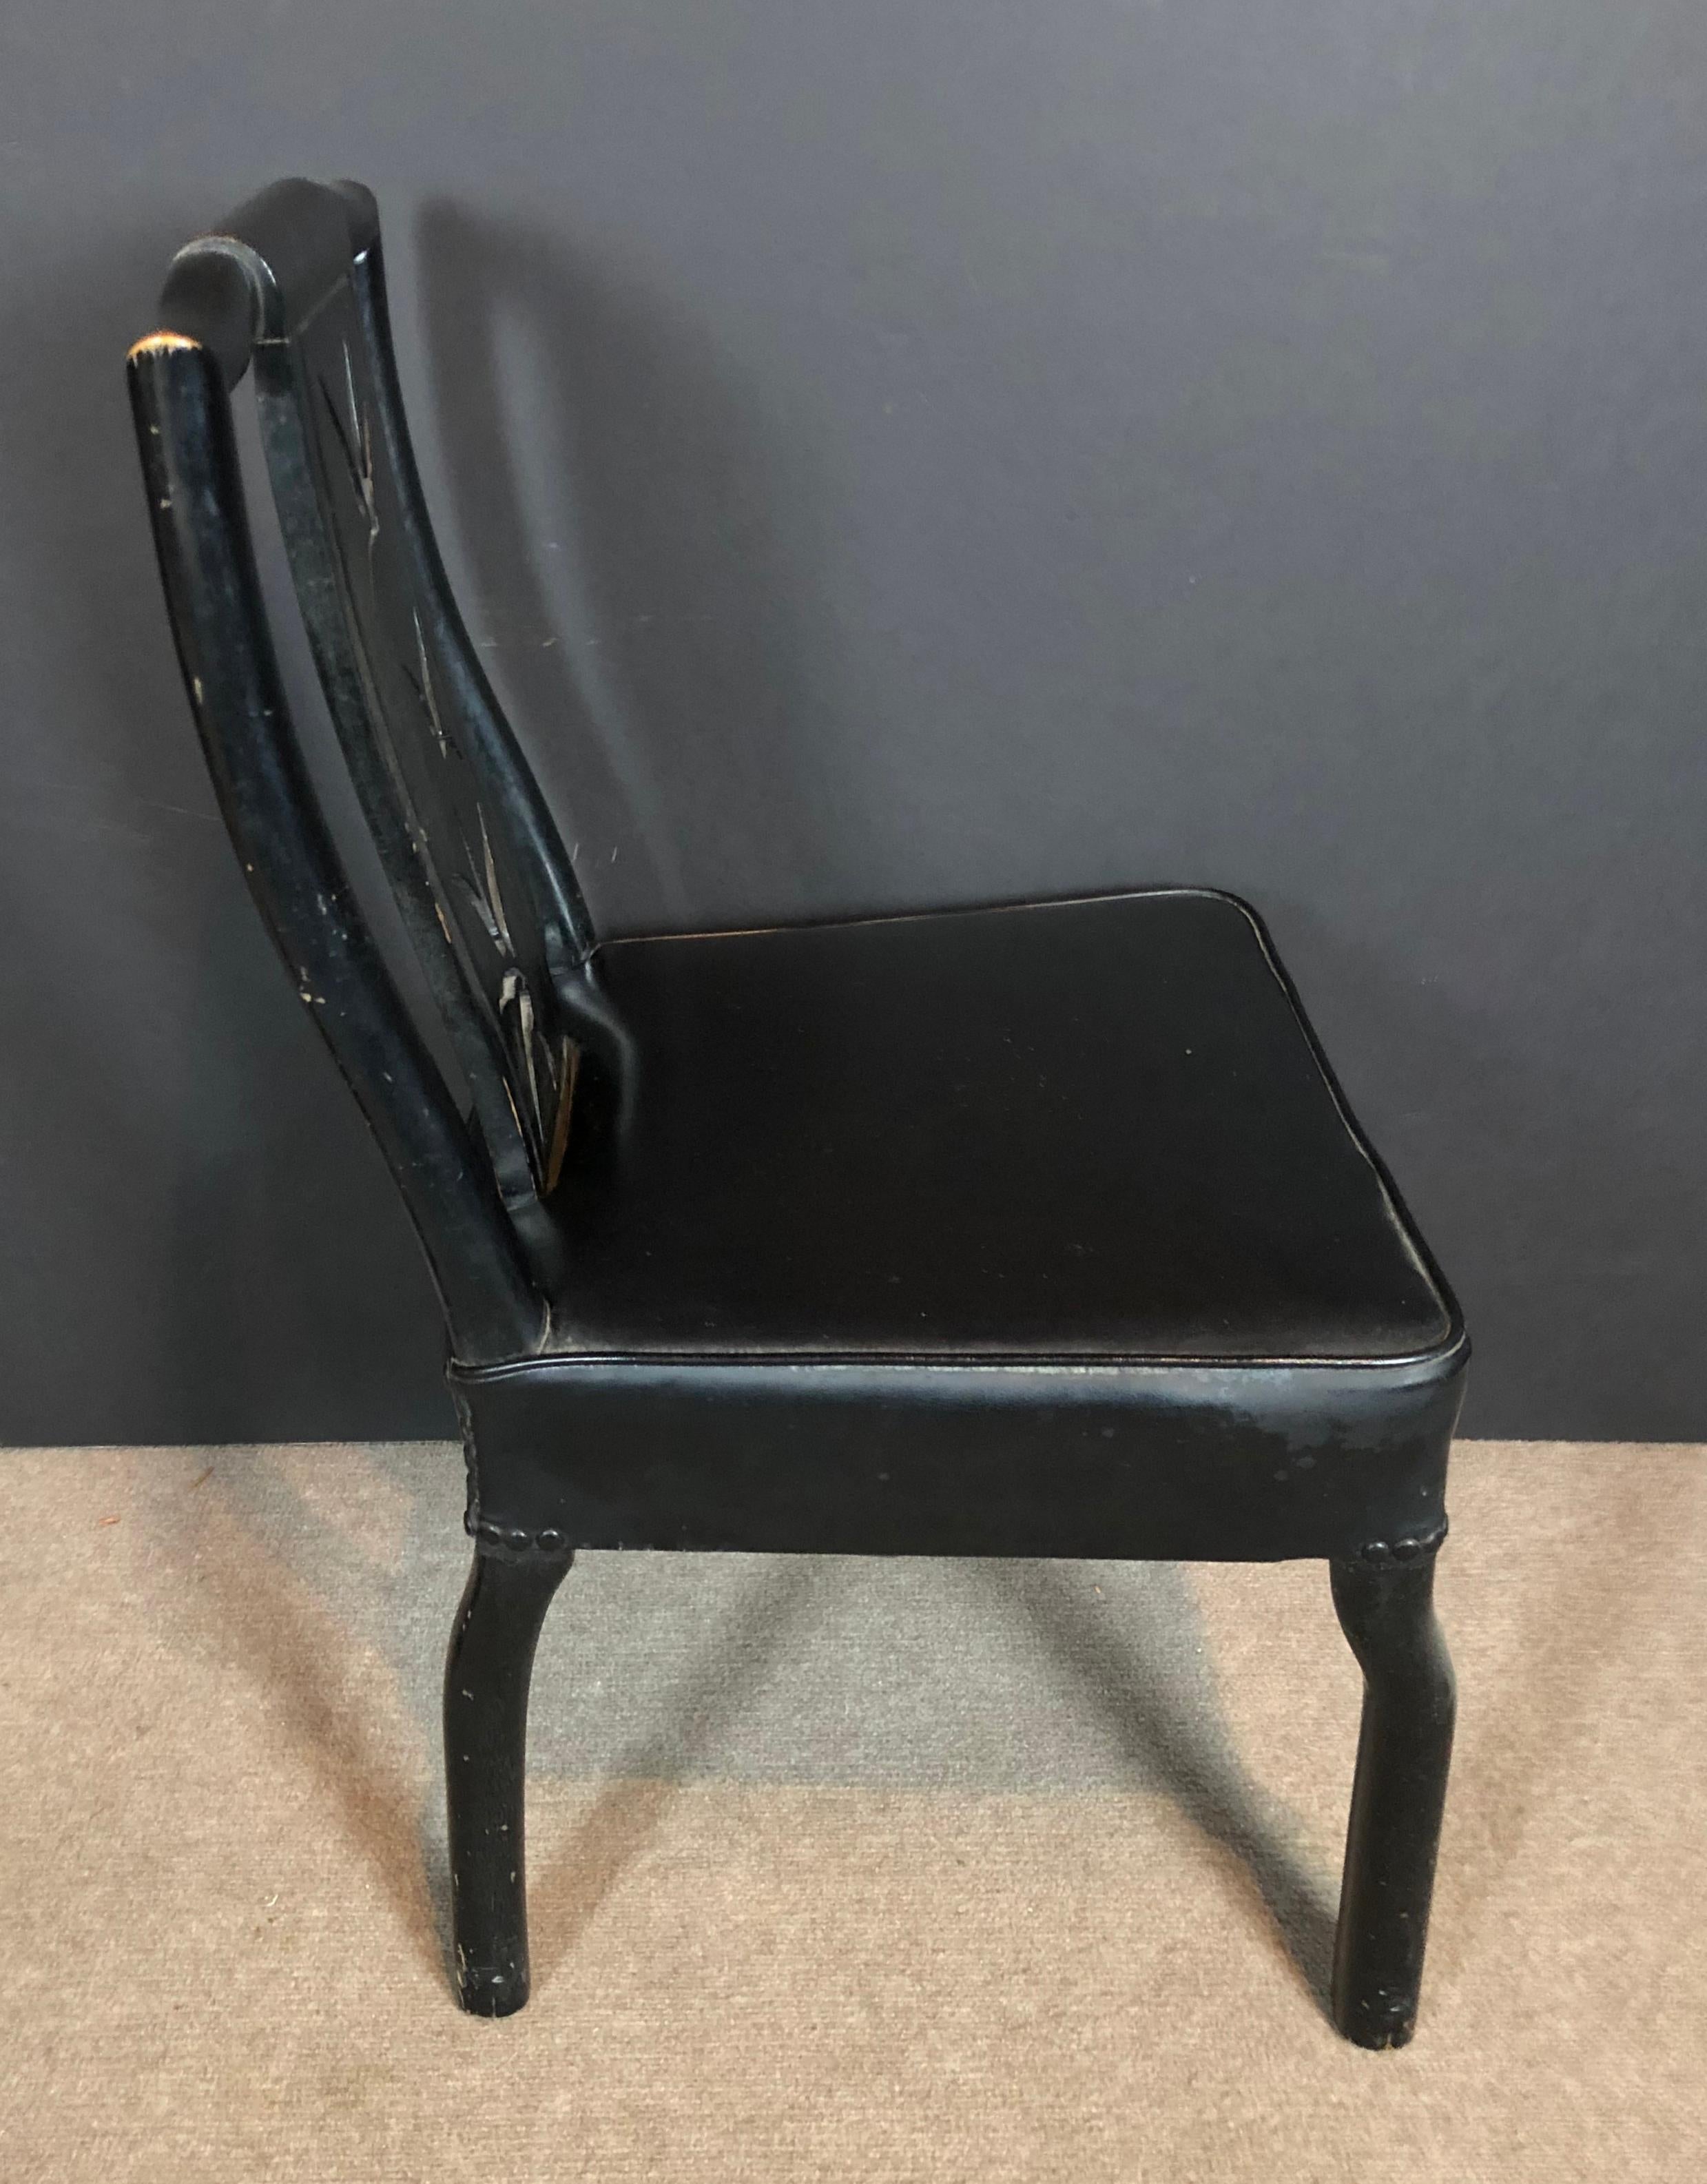 James Mont black lacquer side chair. Chinoiserie modern desk chair.
Asian style chair with cut out design, leather seat, nail head design. All original.